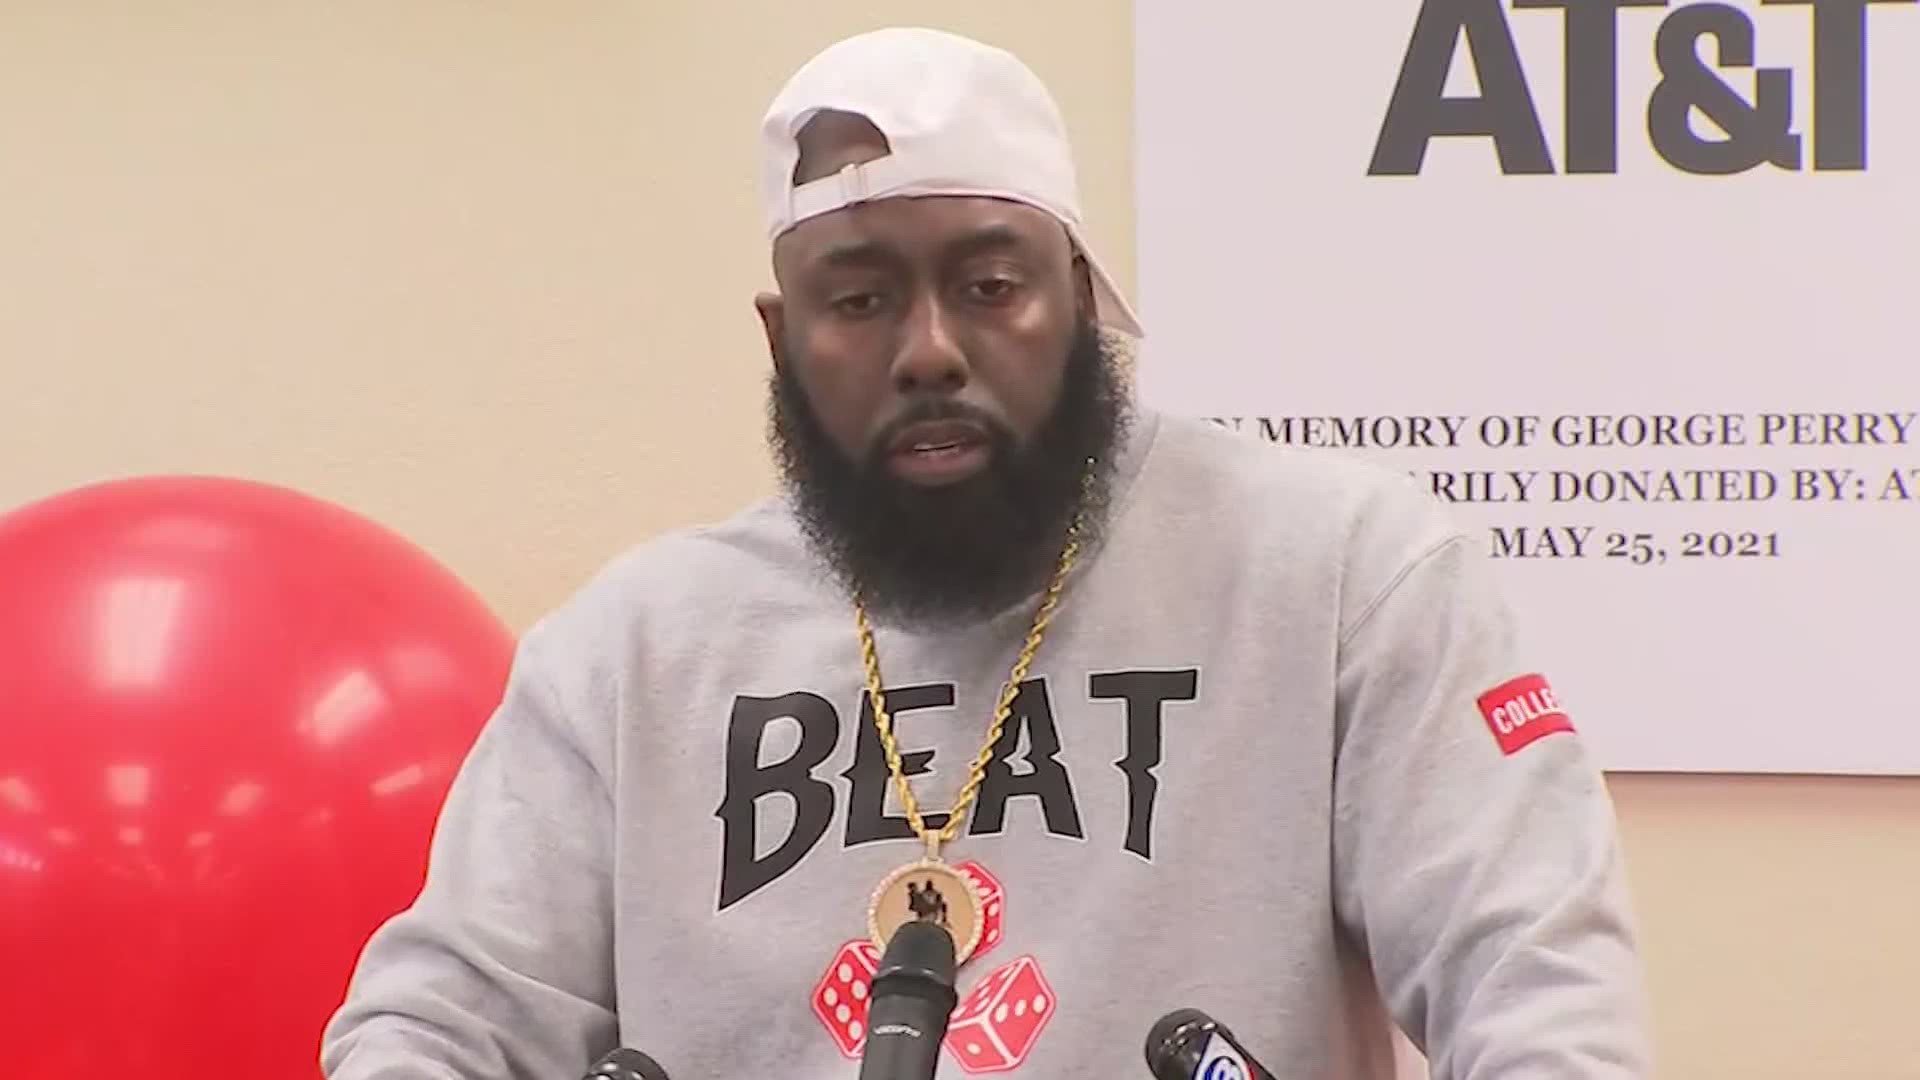 Trae Tha Truth is a business owner, a humanitarian, a philanthropist, an advocate and an activist -- and he calls Houston home.